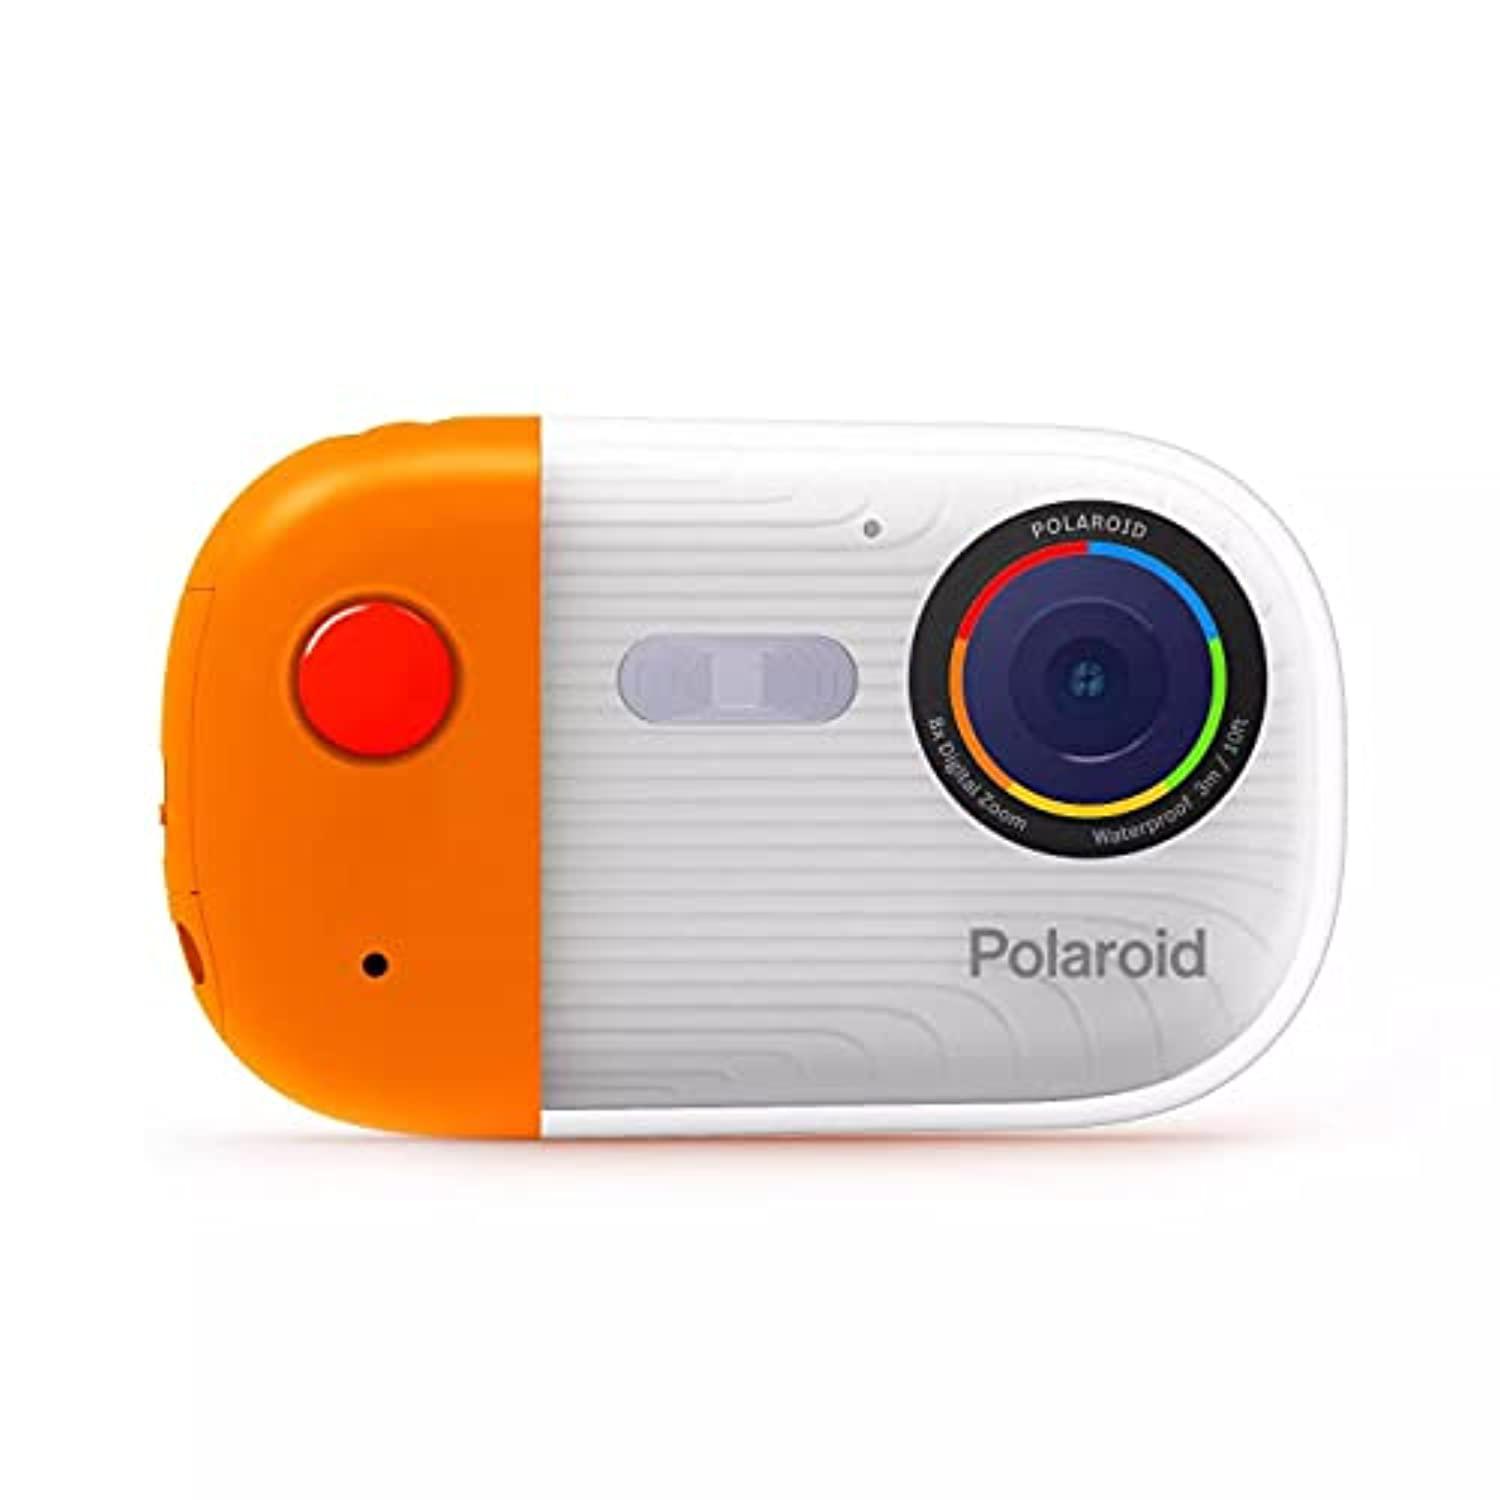 Sakar polaroid underwater camera 18mp 4k uhd, polaroid waterproof camera for snorkeling and diving with lcd display, usb rechargeab